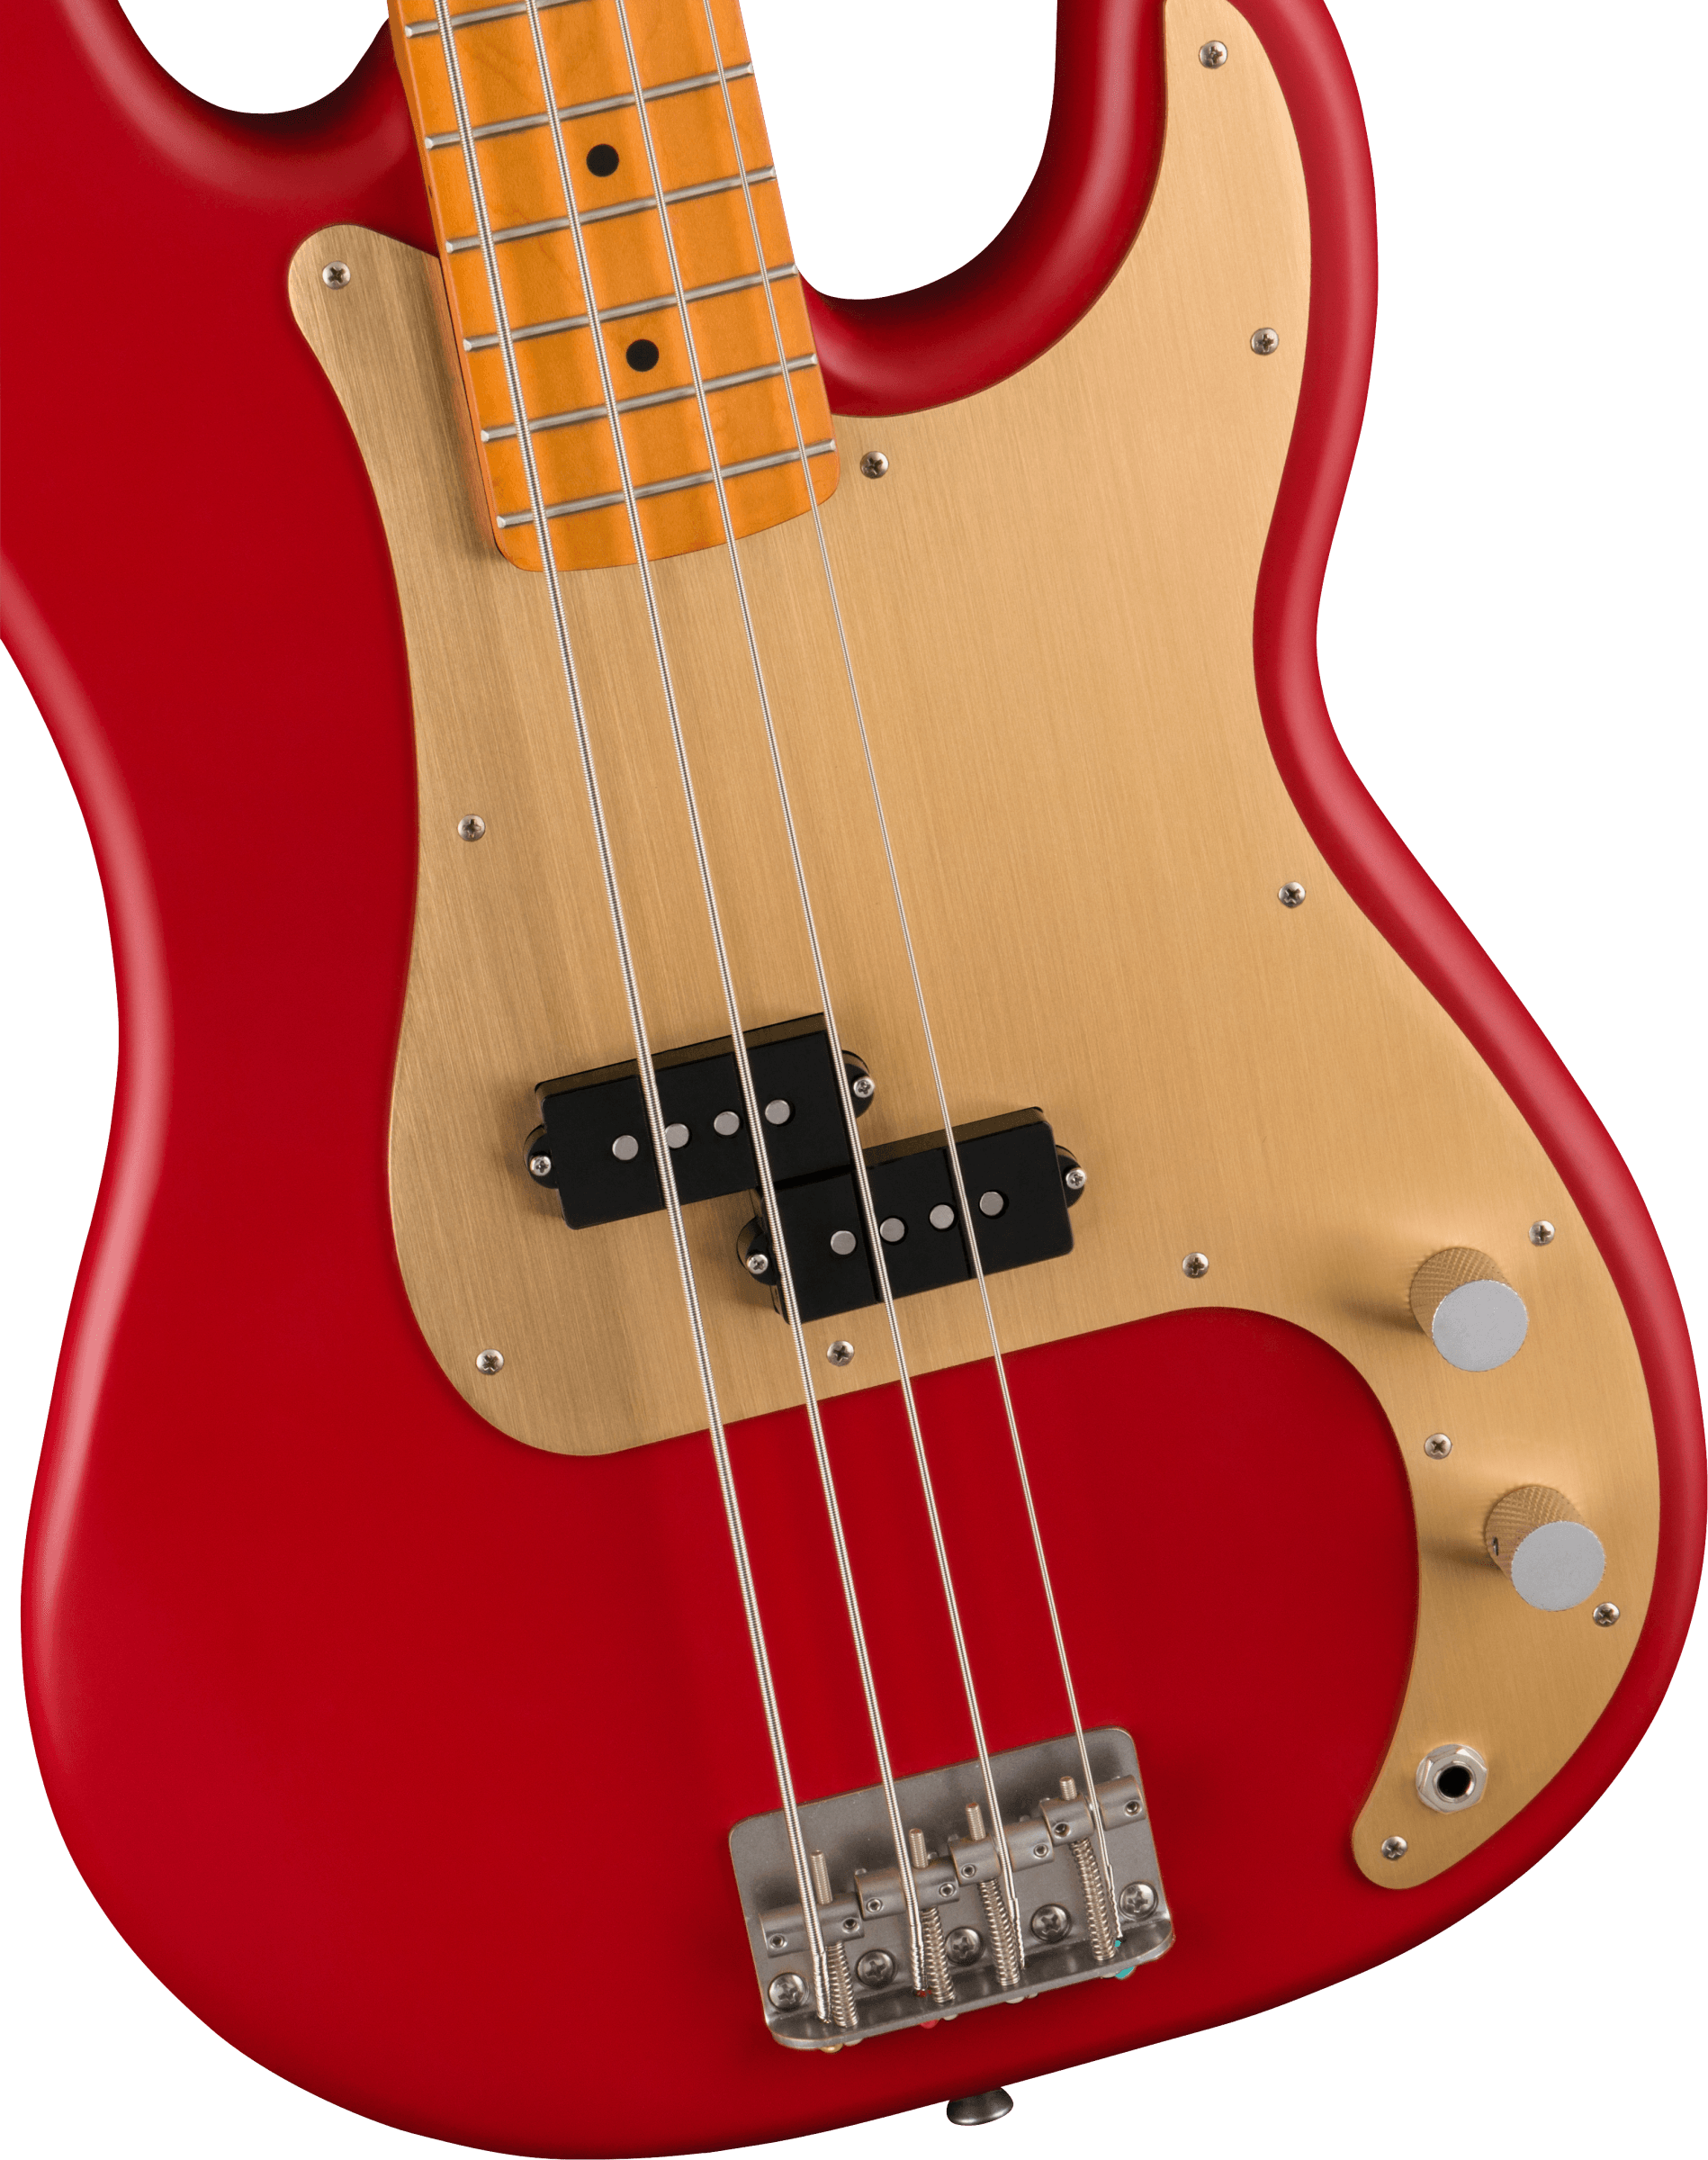 Squier Precision Bass 40th Anniversary Gold Edition Mn - Satin Dakota Red - Solid body electric bass - Variation 2